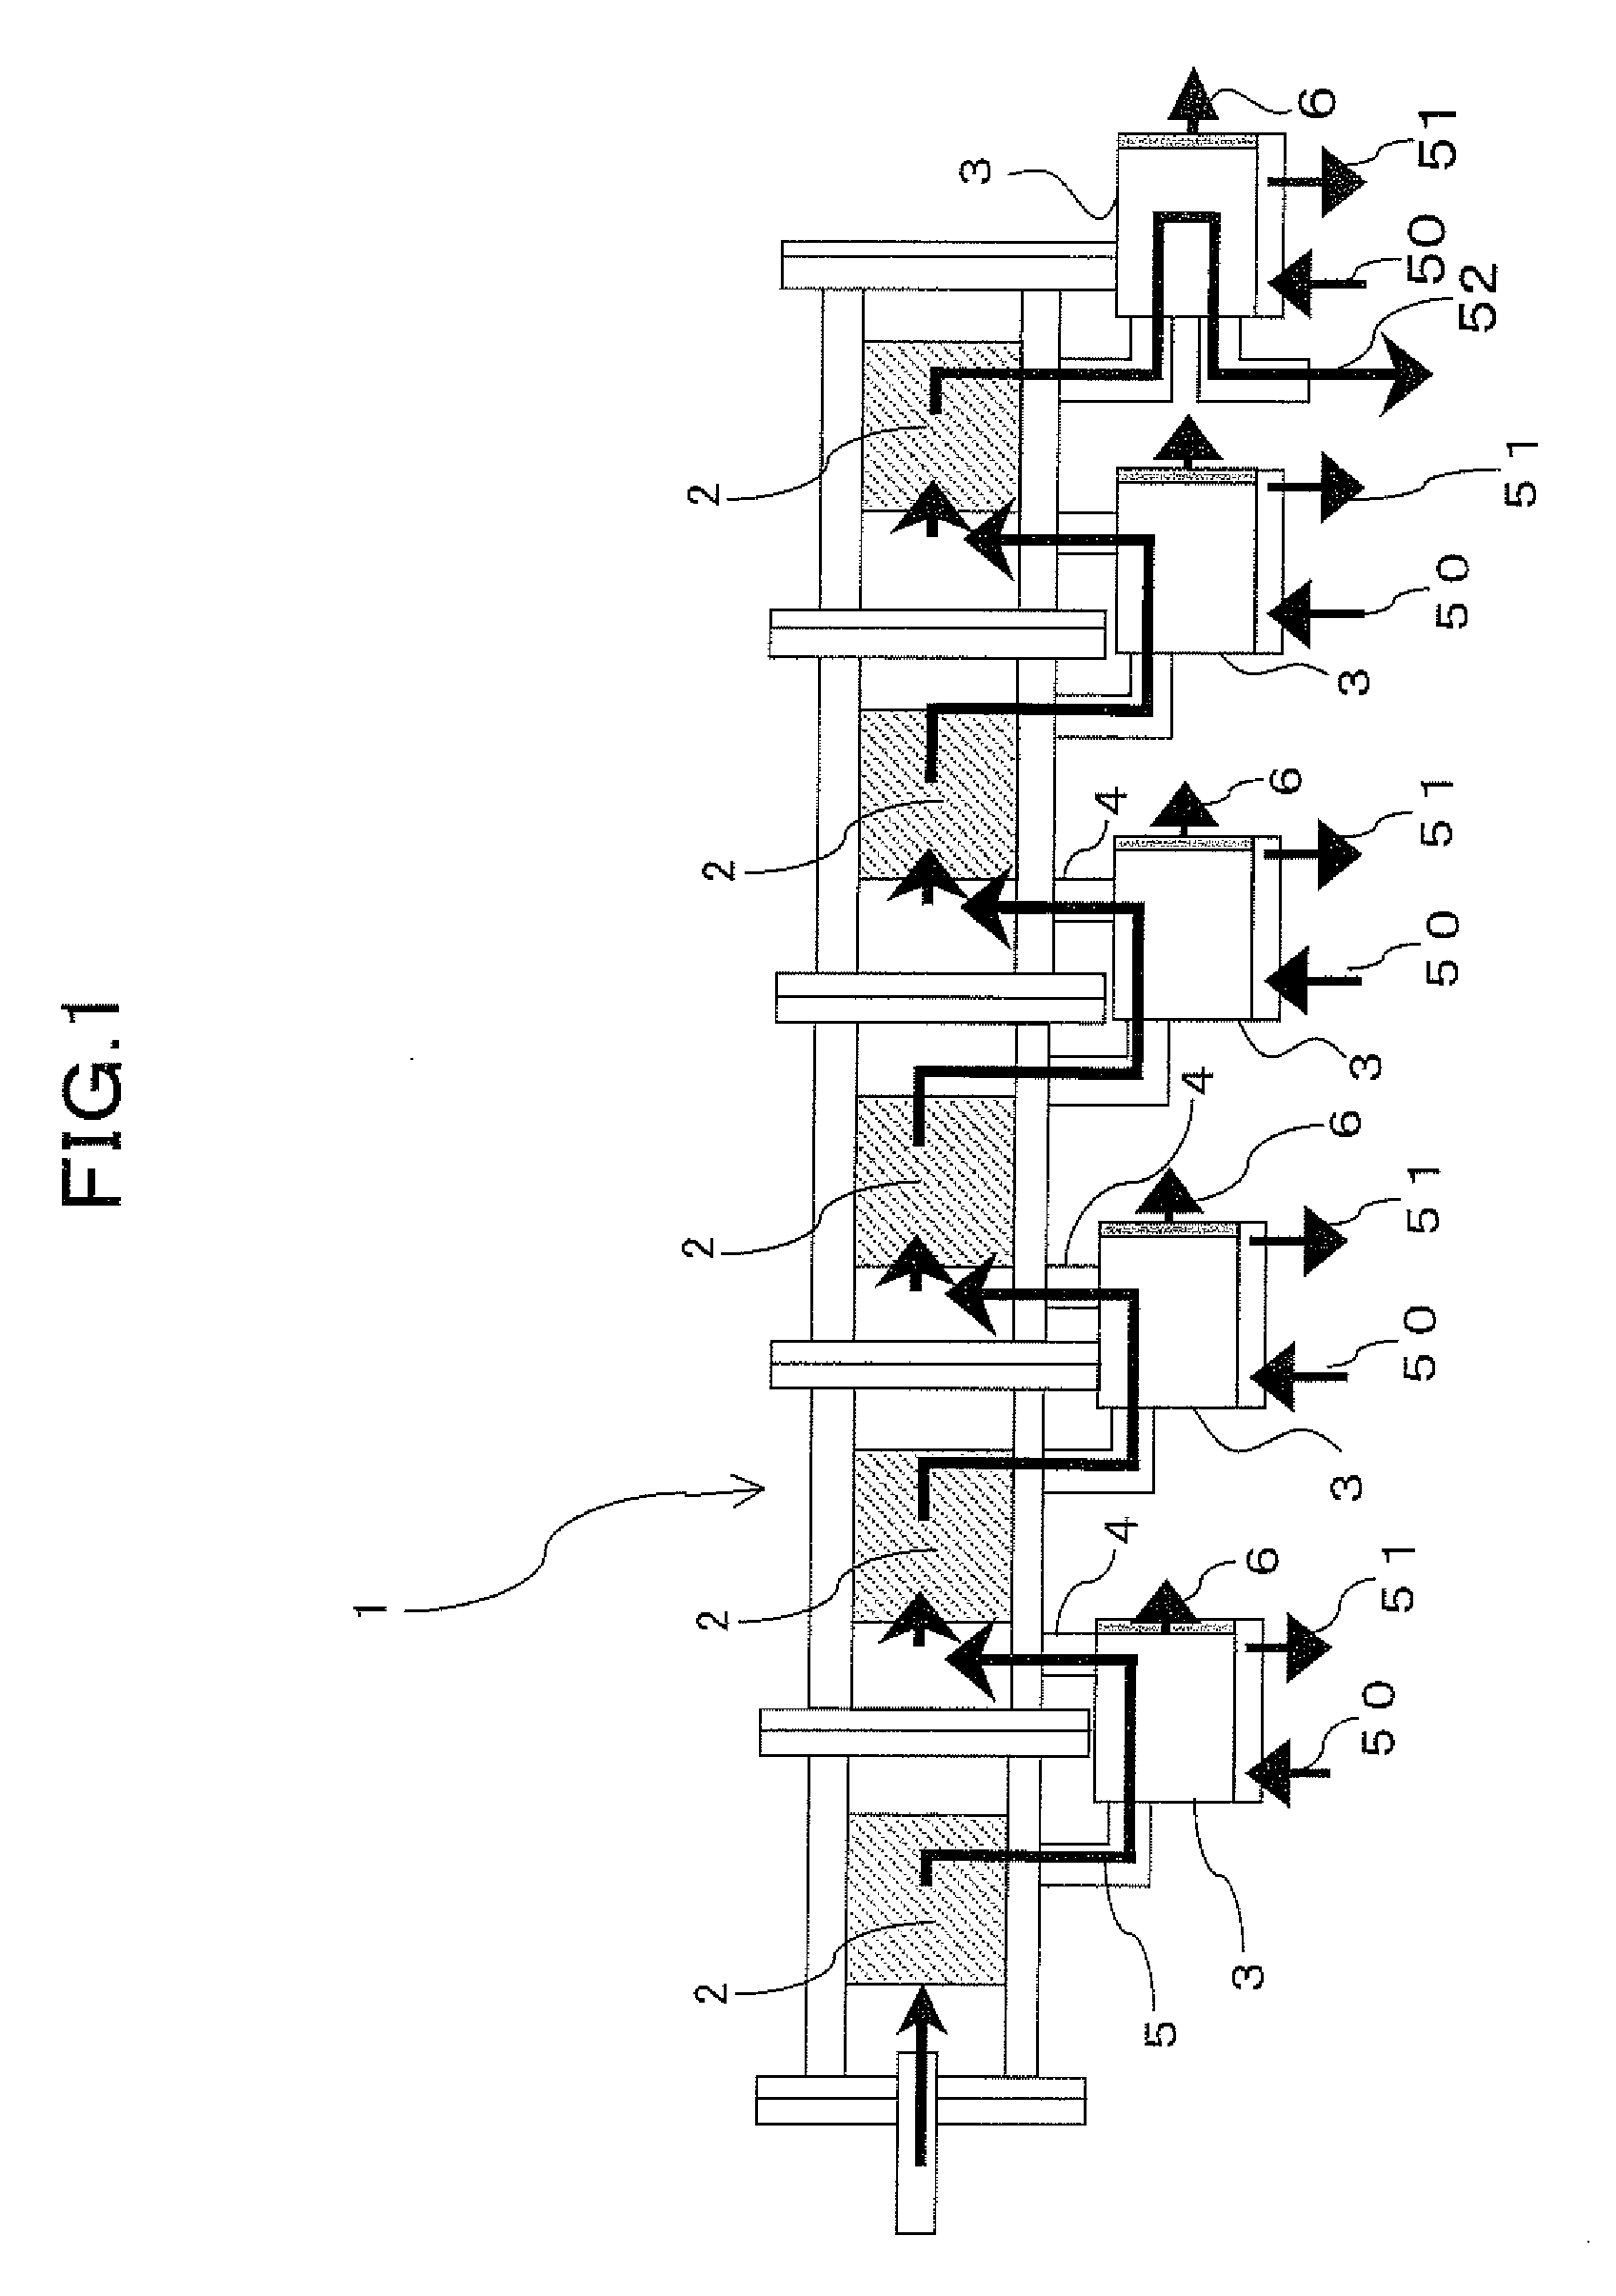 Apparatus and process for production of liquid fuel from biomass